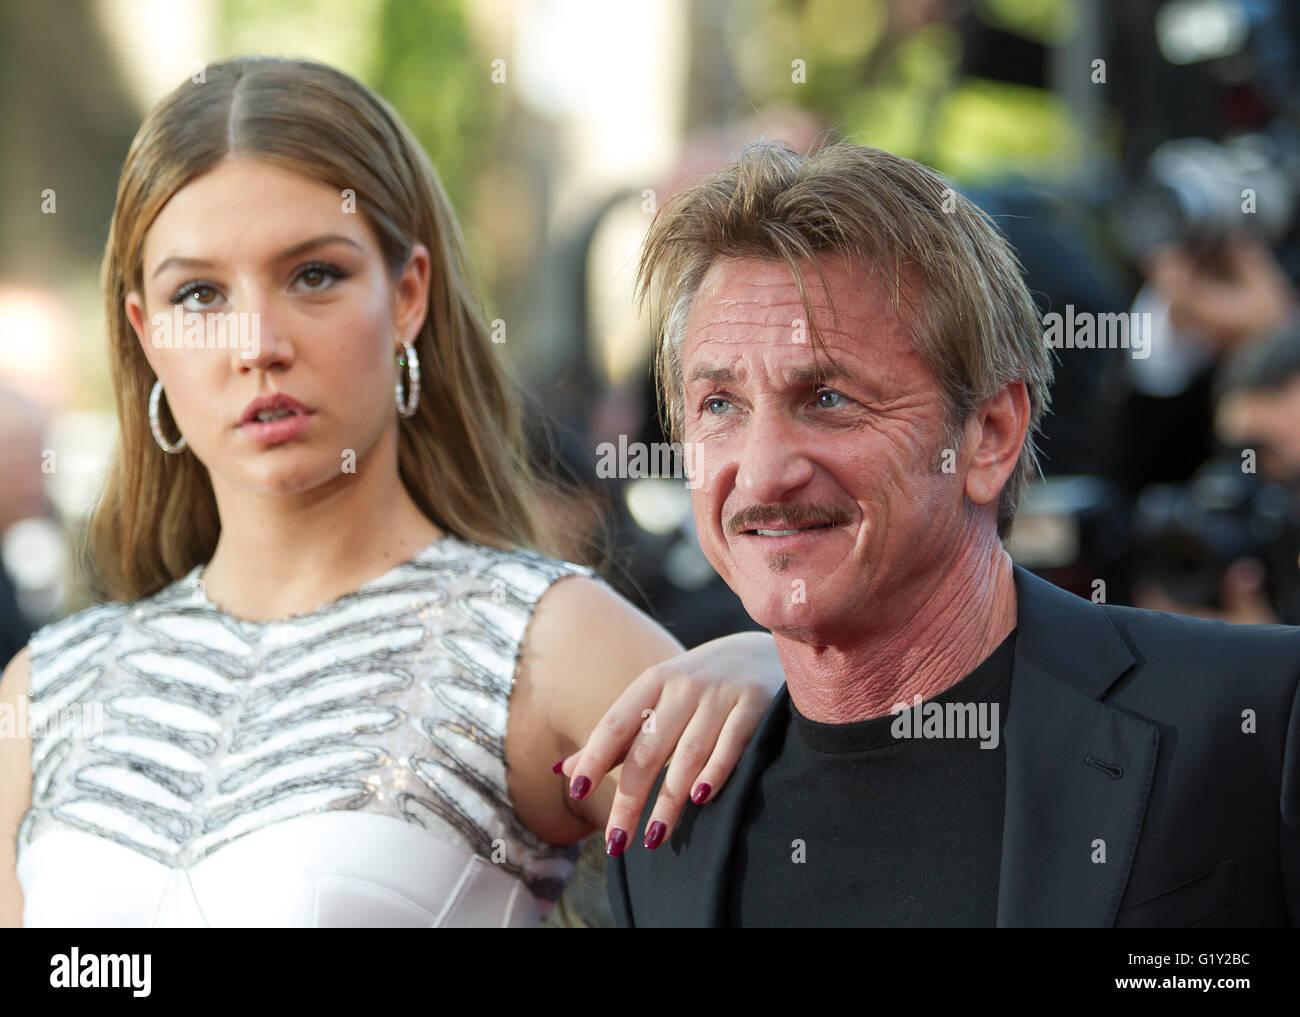 Sean Penn Spends Another Day with French Actress Adele Exarchopoulos!, Adele  Exarchopoulos, Sean Penn